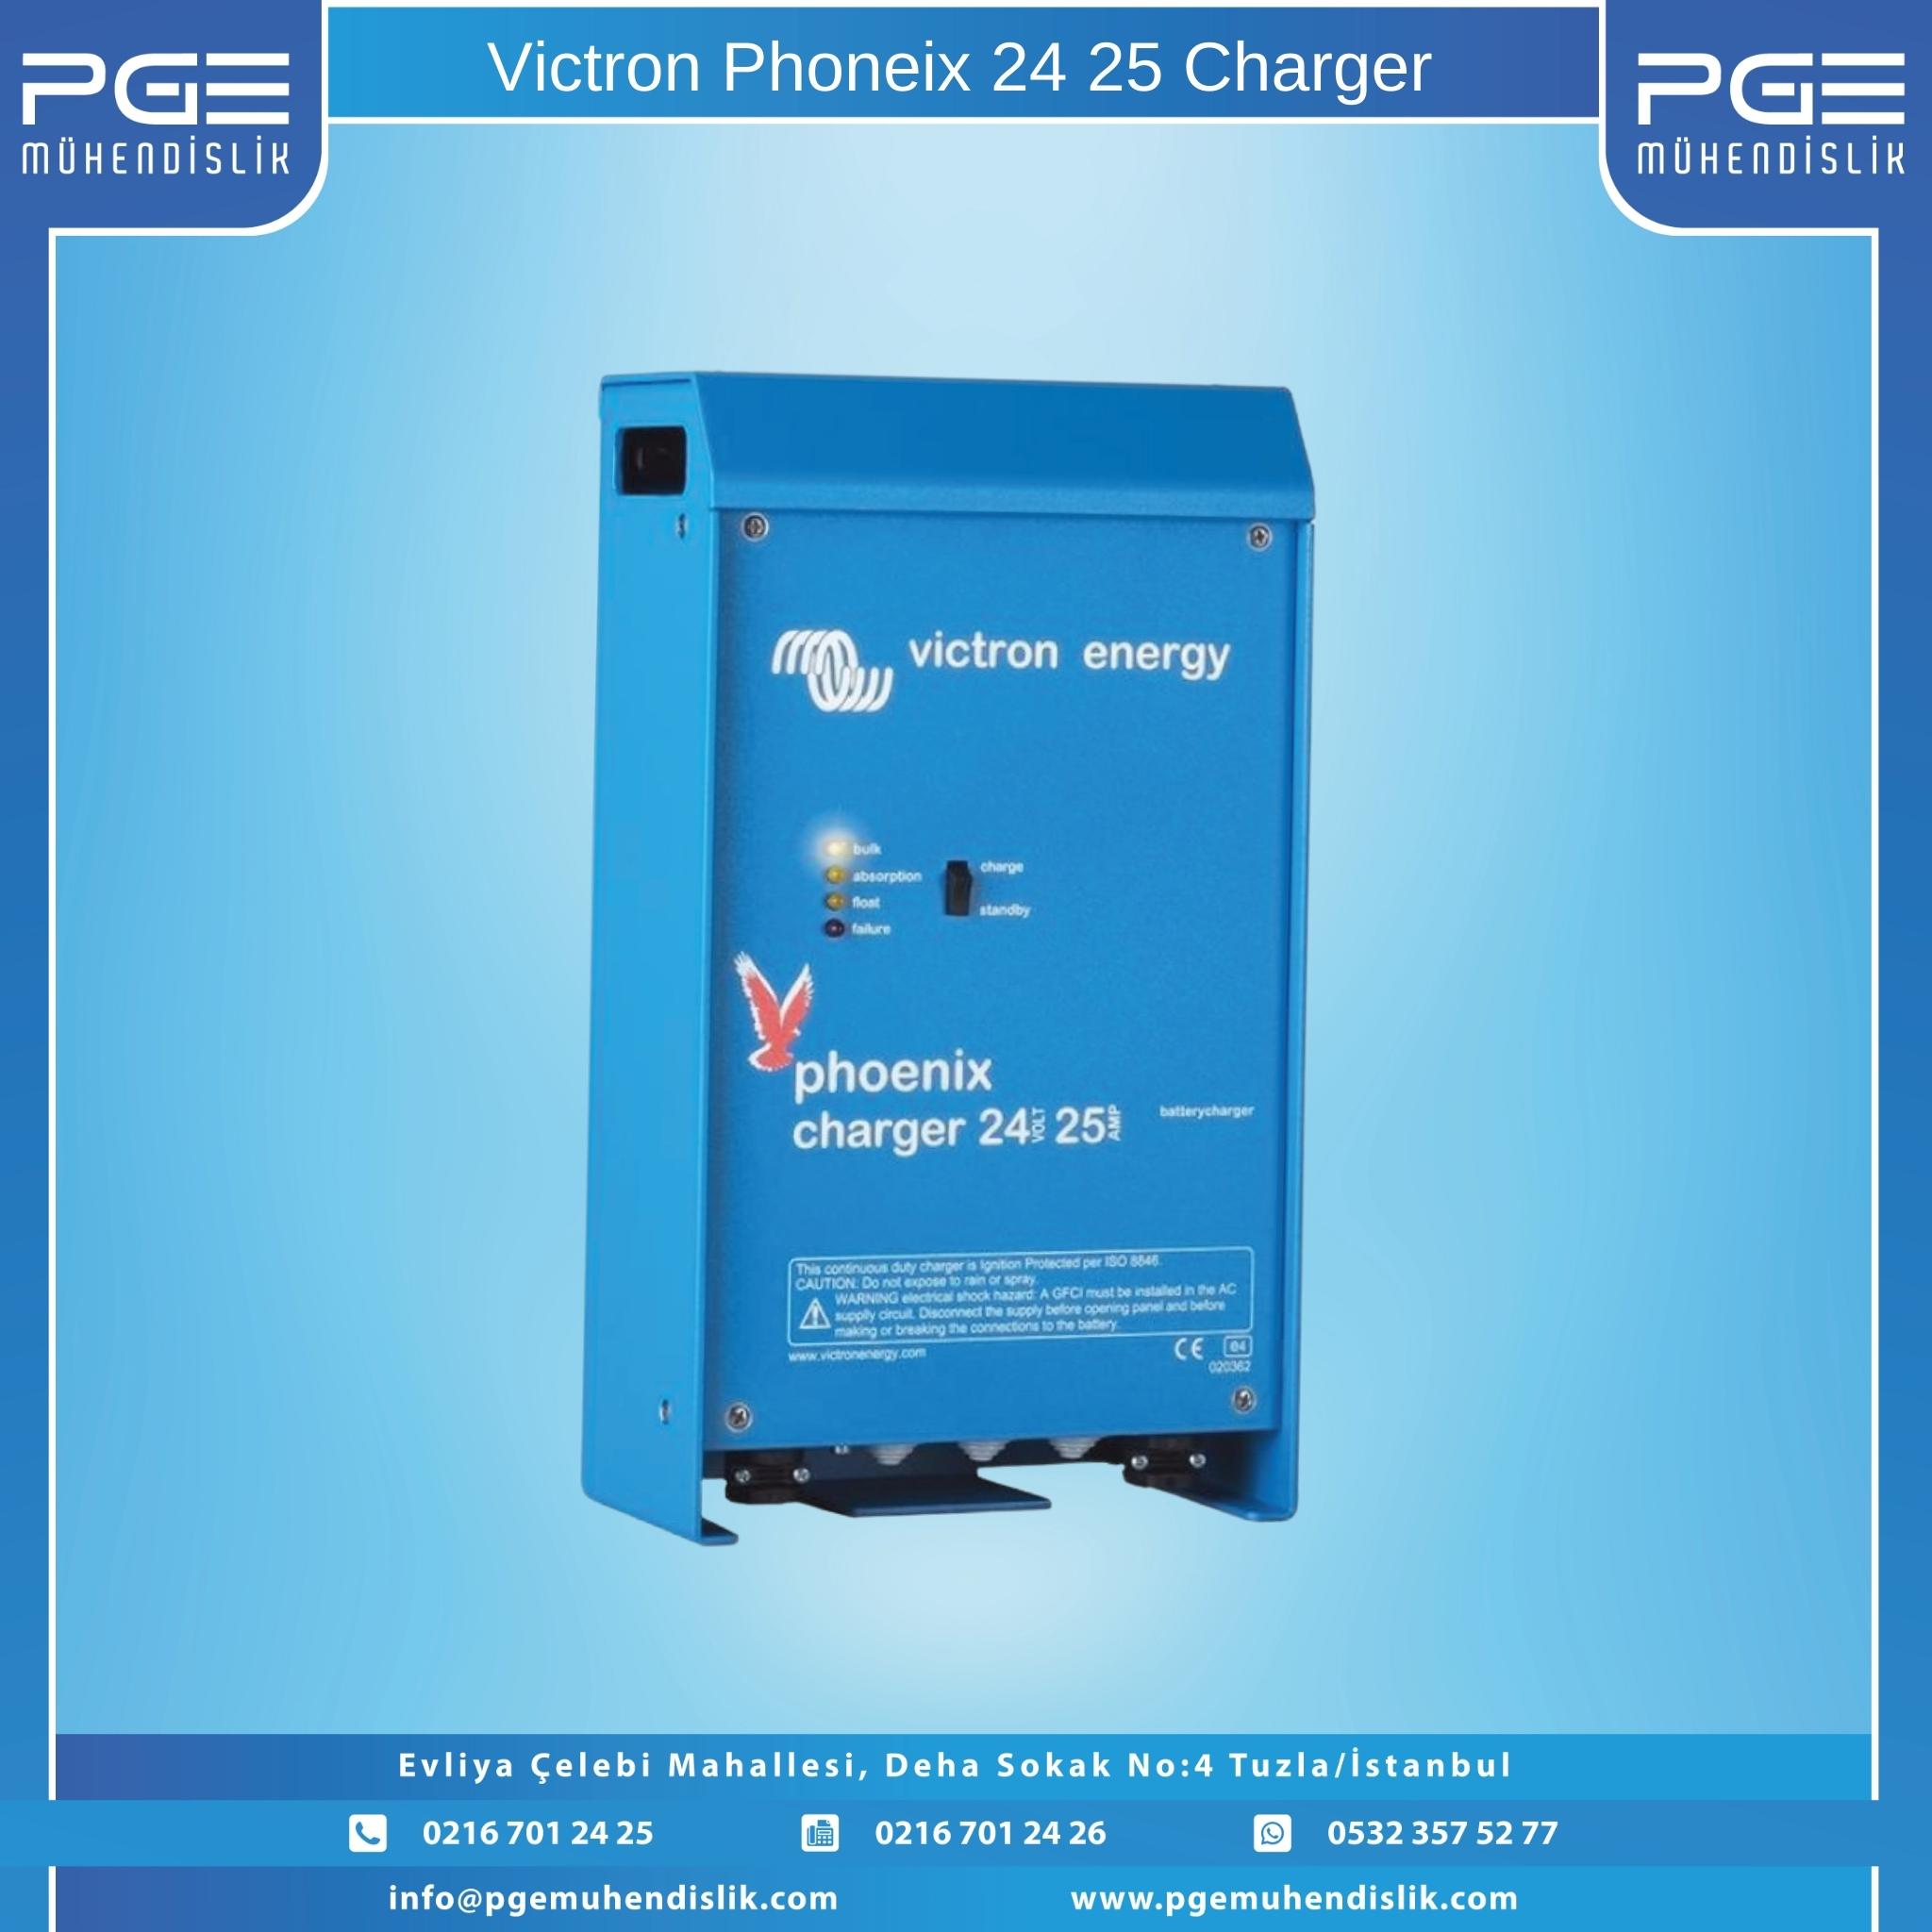 Victron Phoneix 24 25 Charger